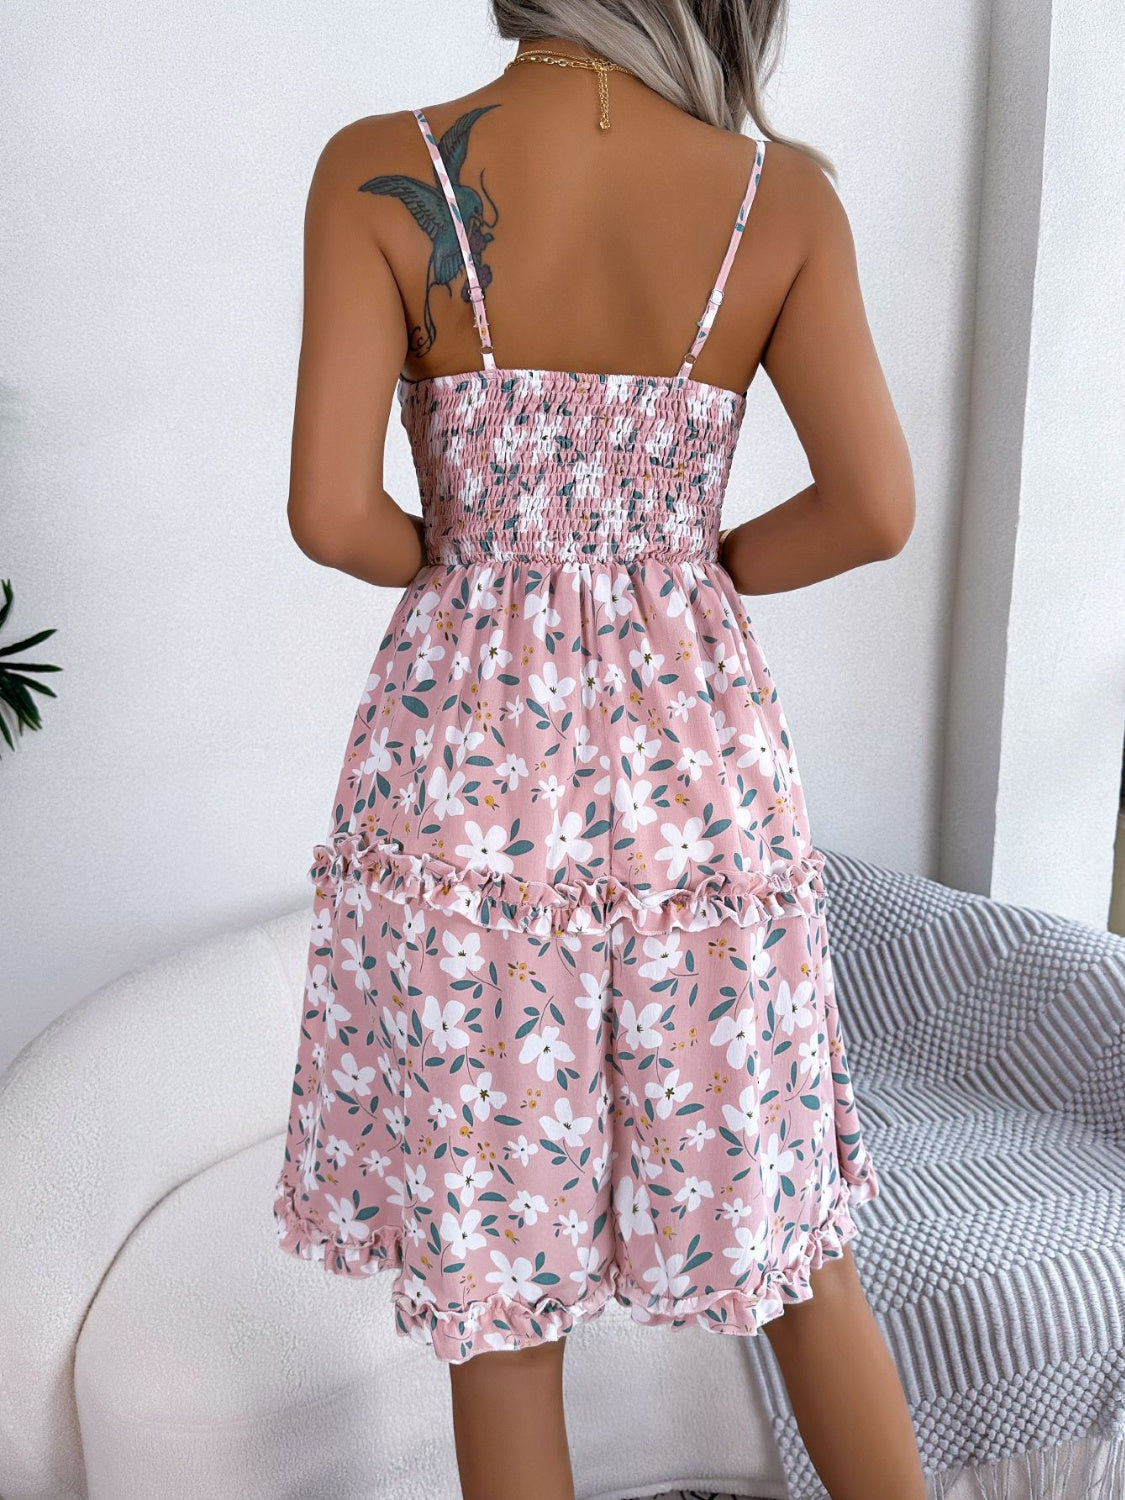 Tied in Bloom Cami Dress